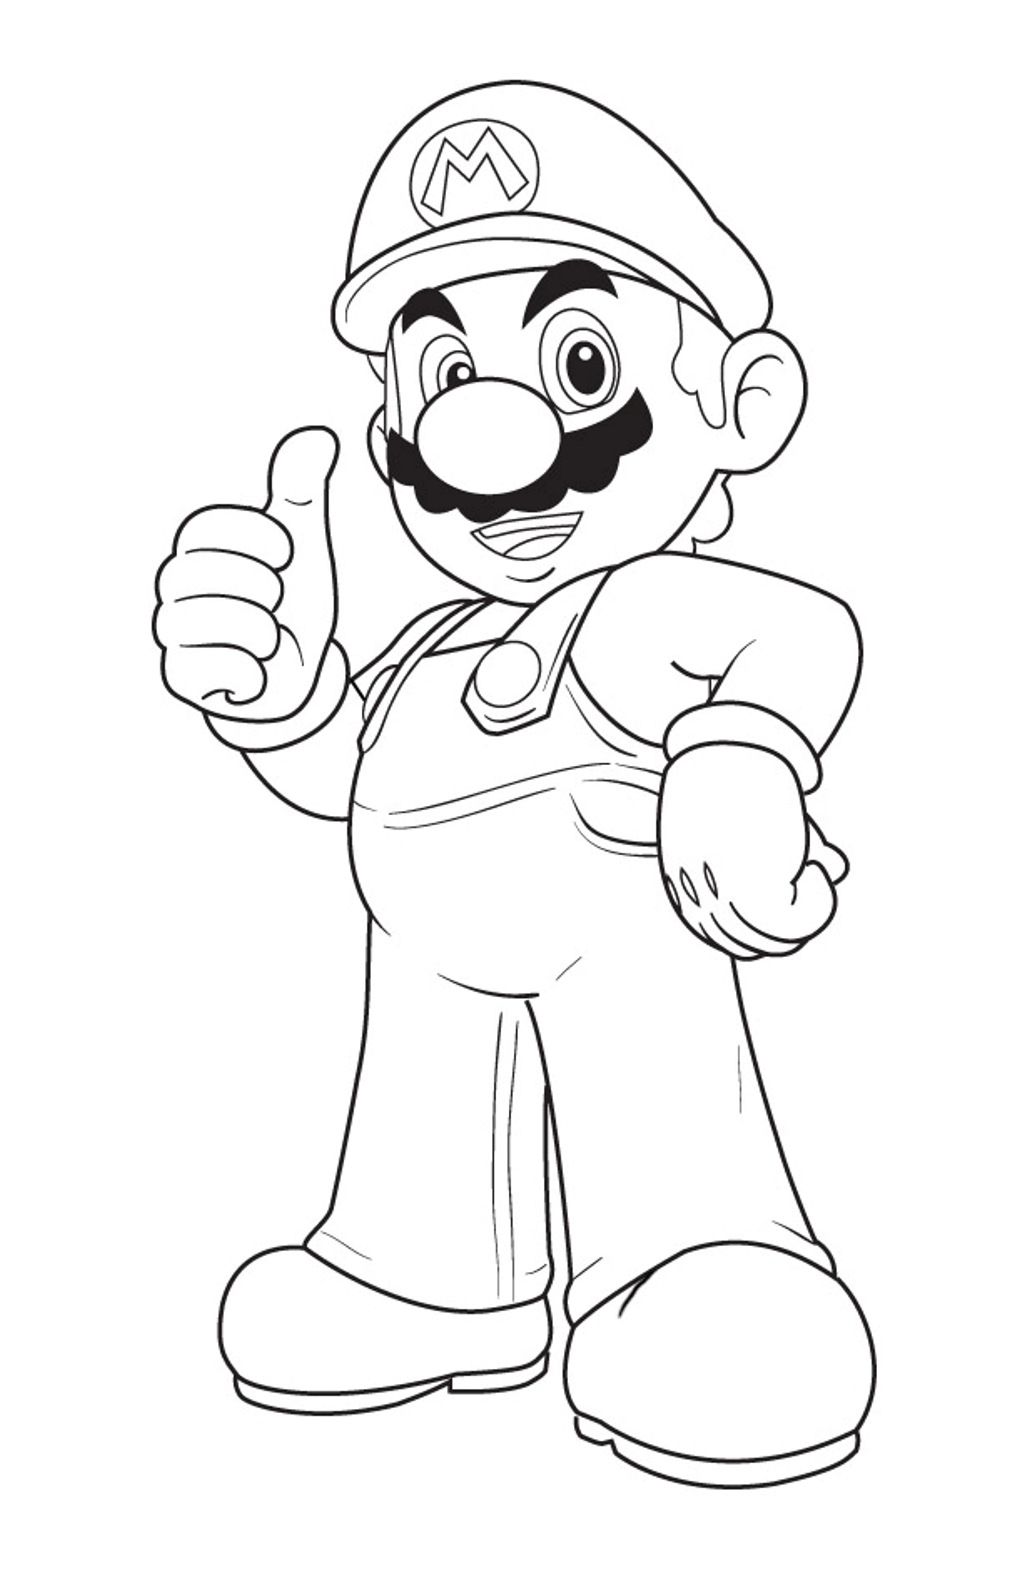 Brothers Cartoon Coloring Pages - Coloring Pages For All Ages